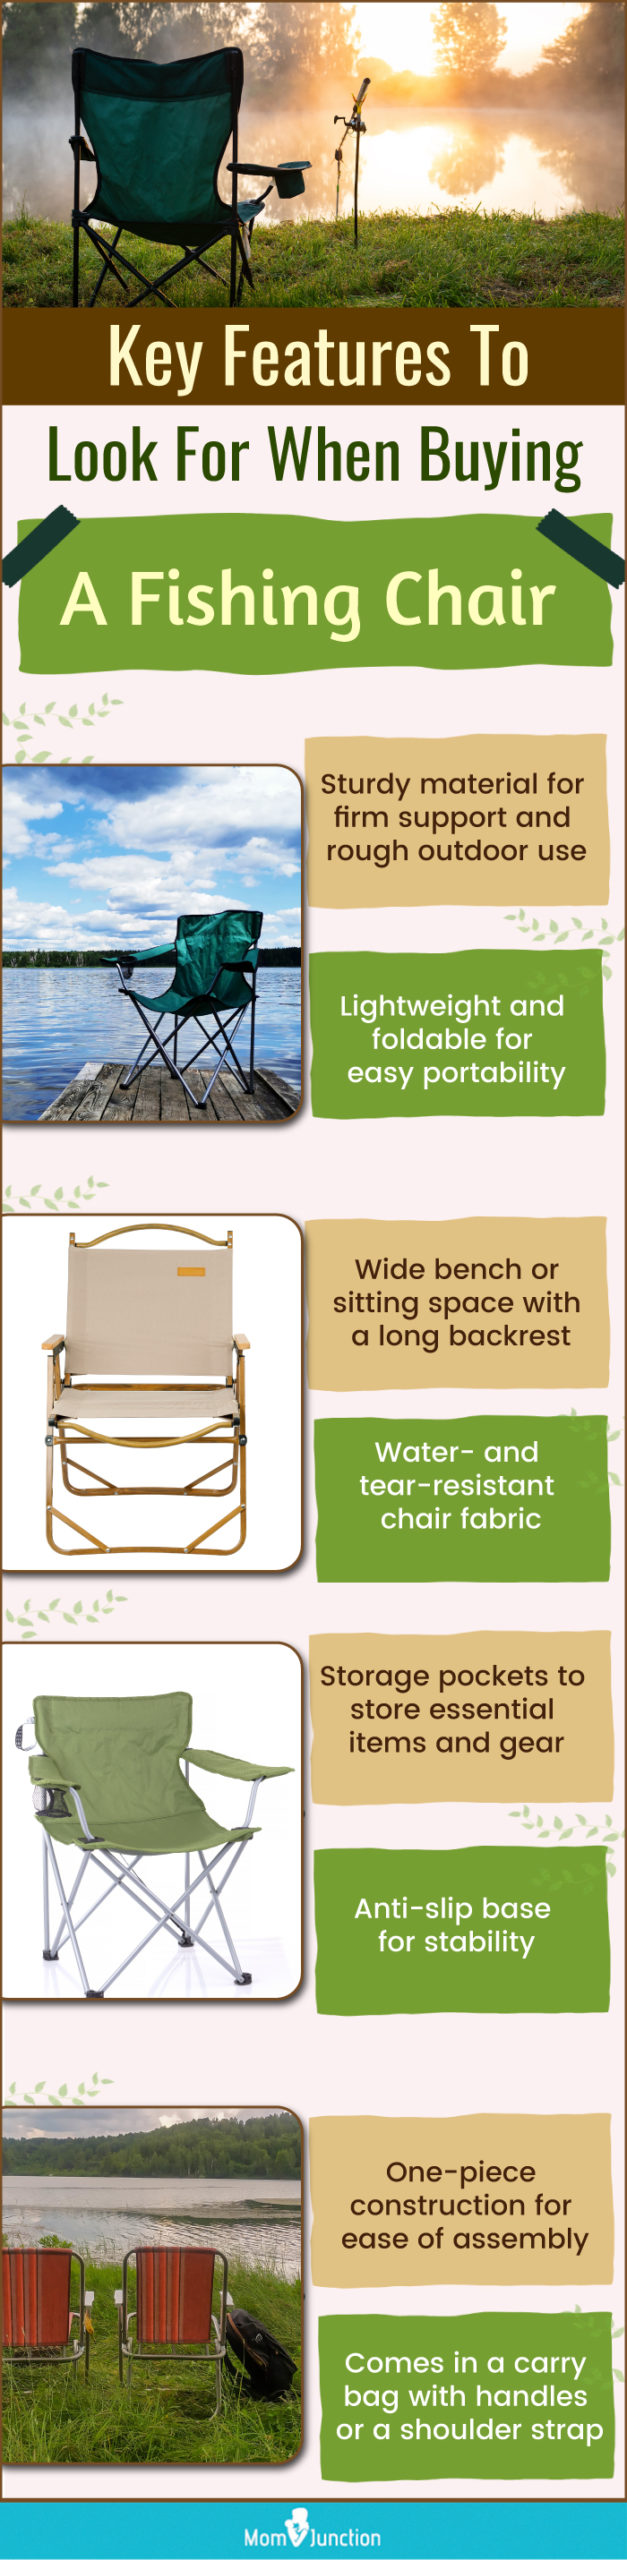 Key Features To Look For When Buying A Fishing Chair (infographic)